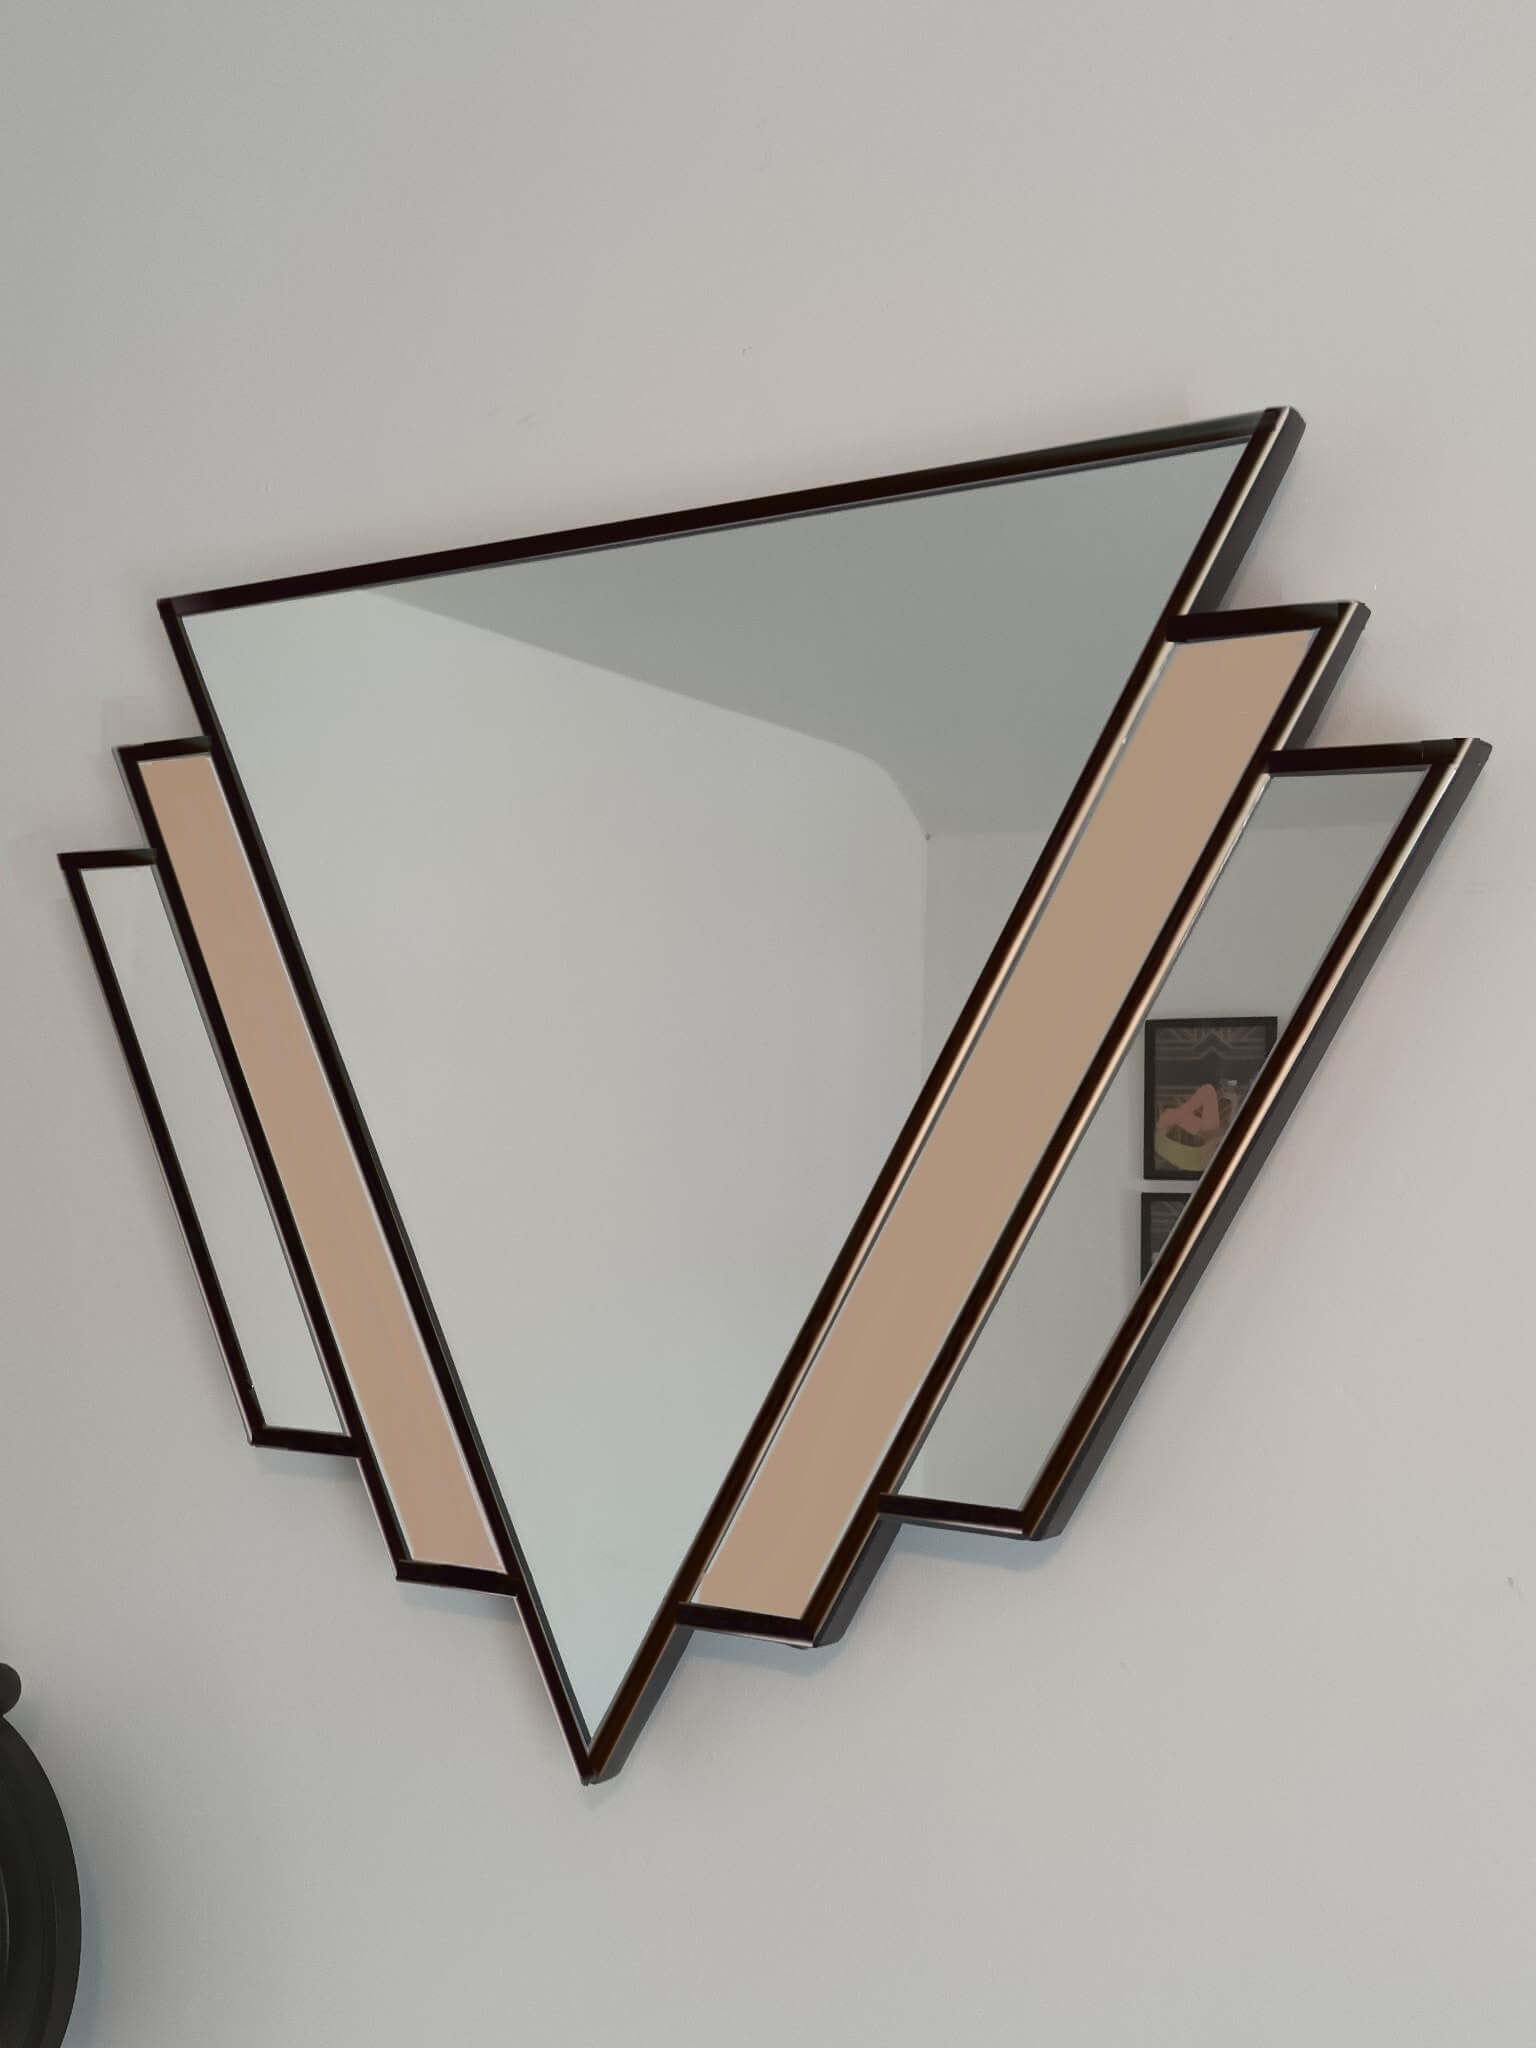 Double W art deco wall mirror with bronze tinted glass